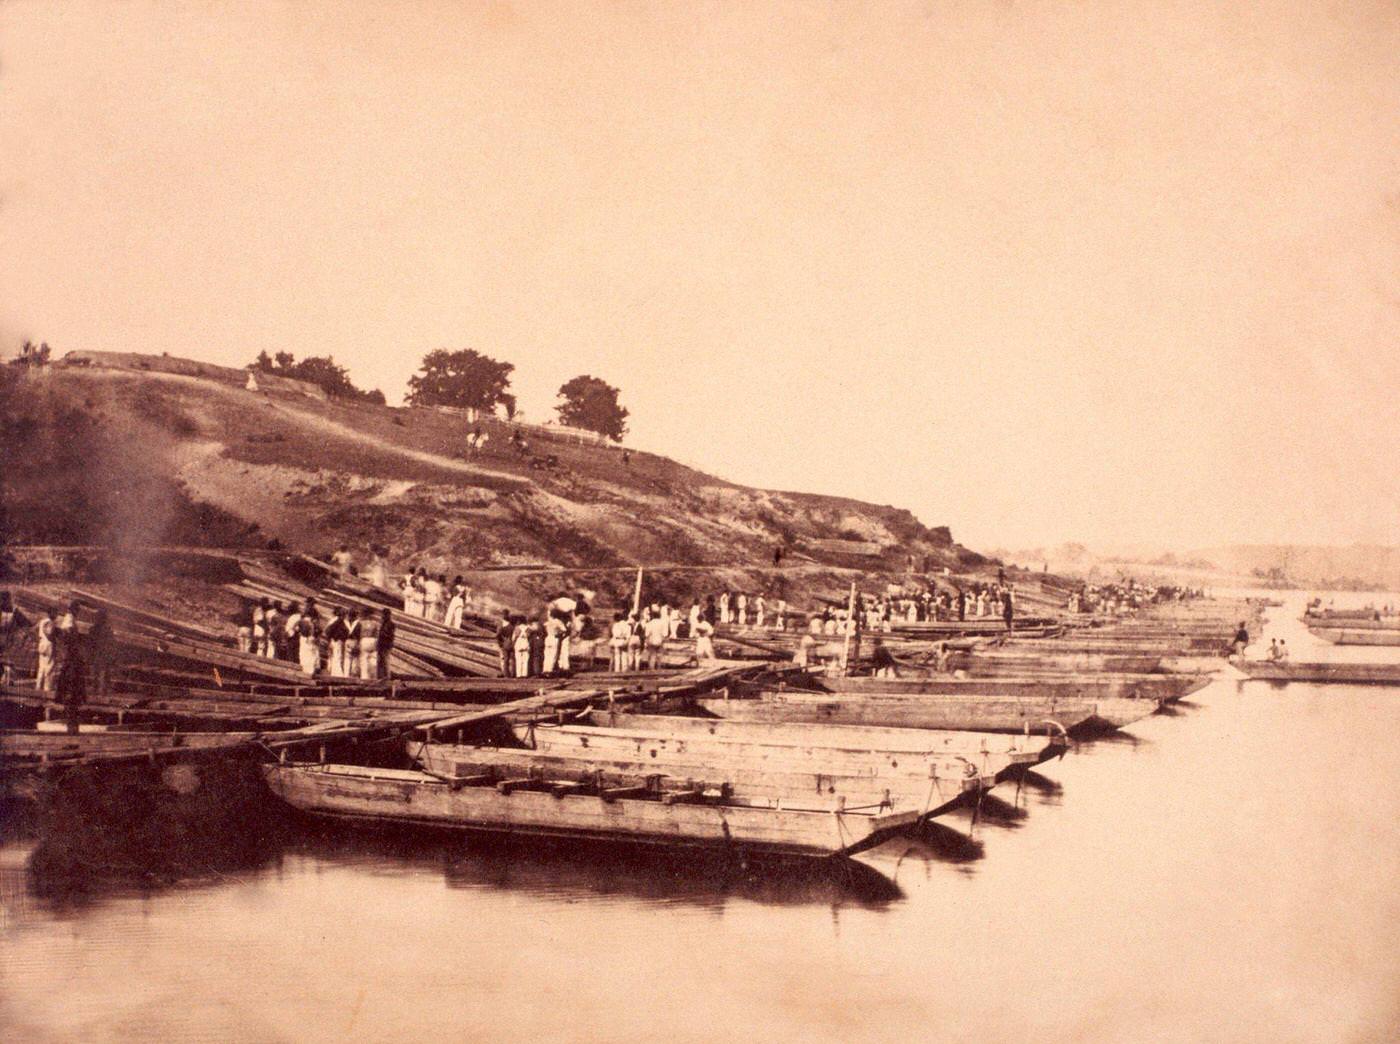 Union engineers are timed as they build a pontoon bridge near Washington, D.C., during the American Civil War.